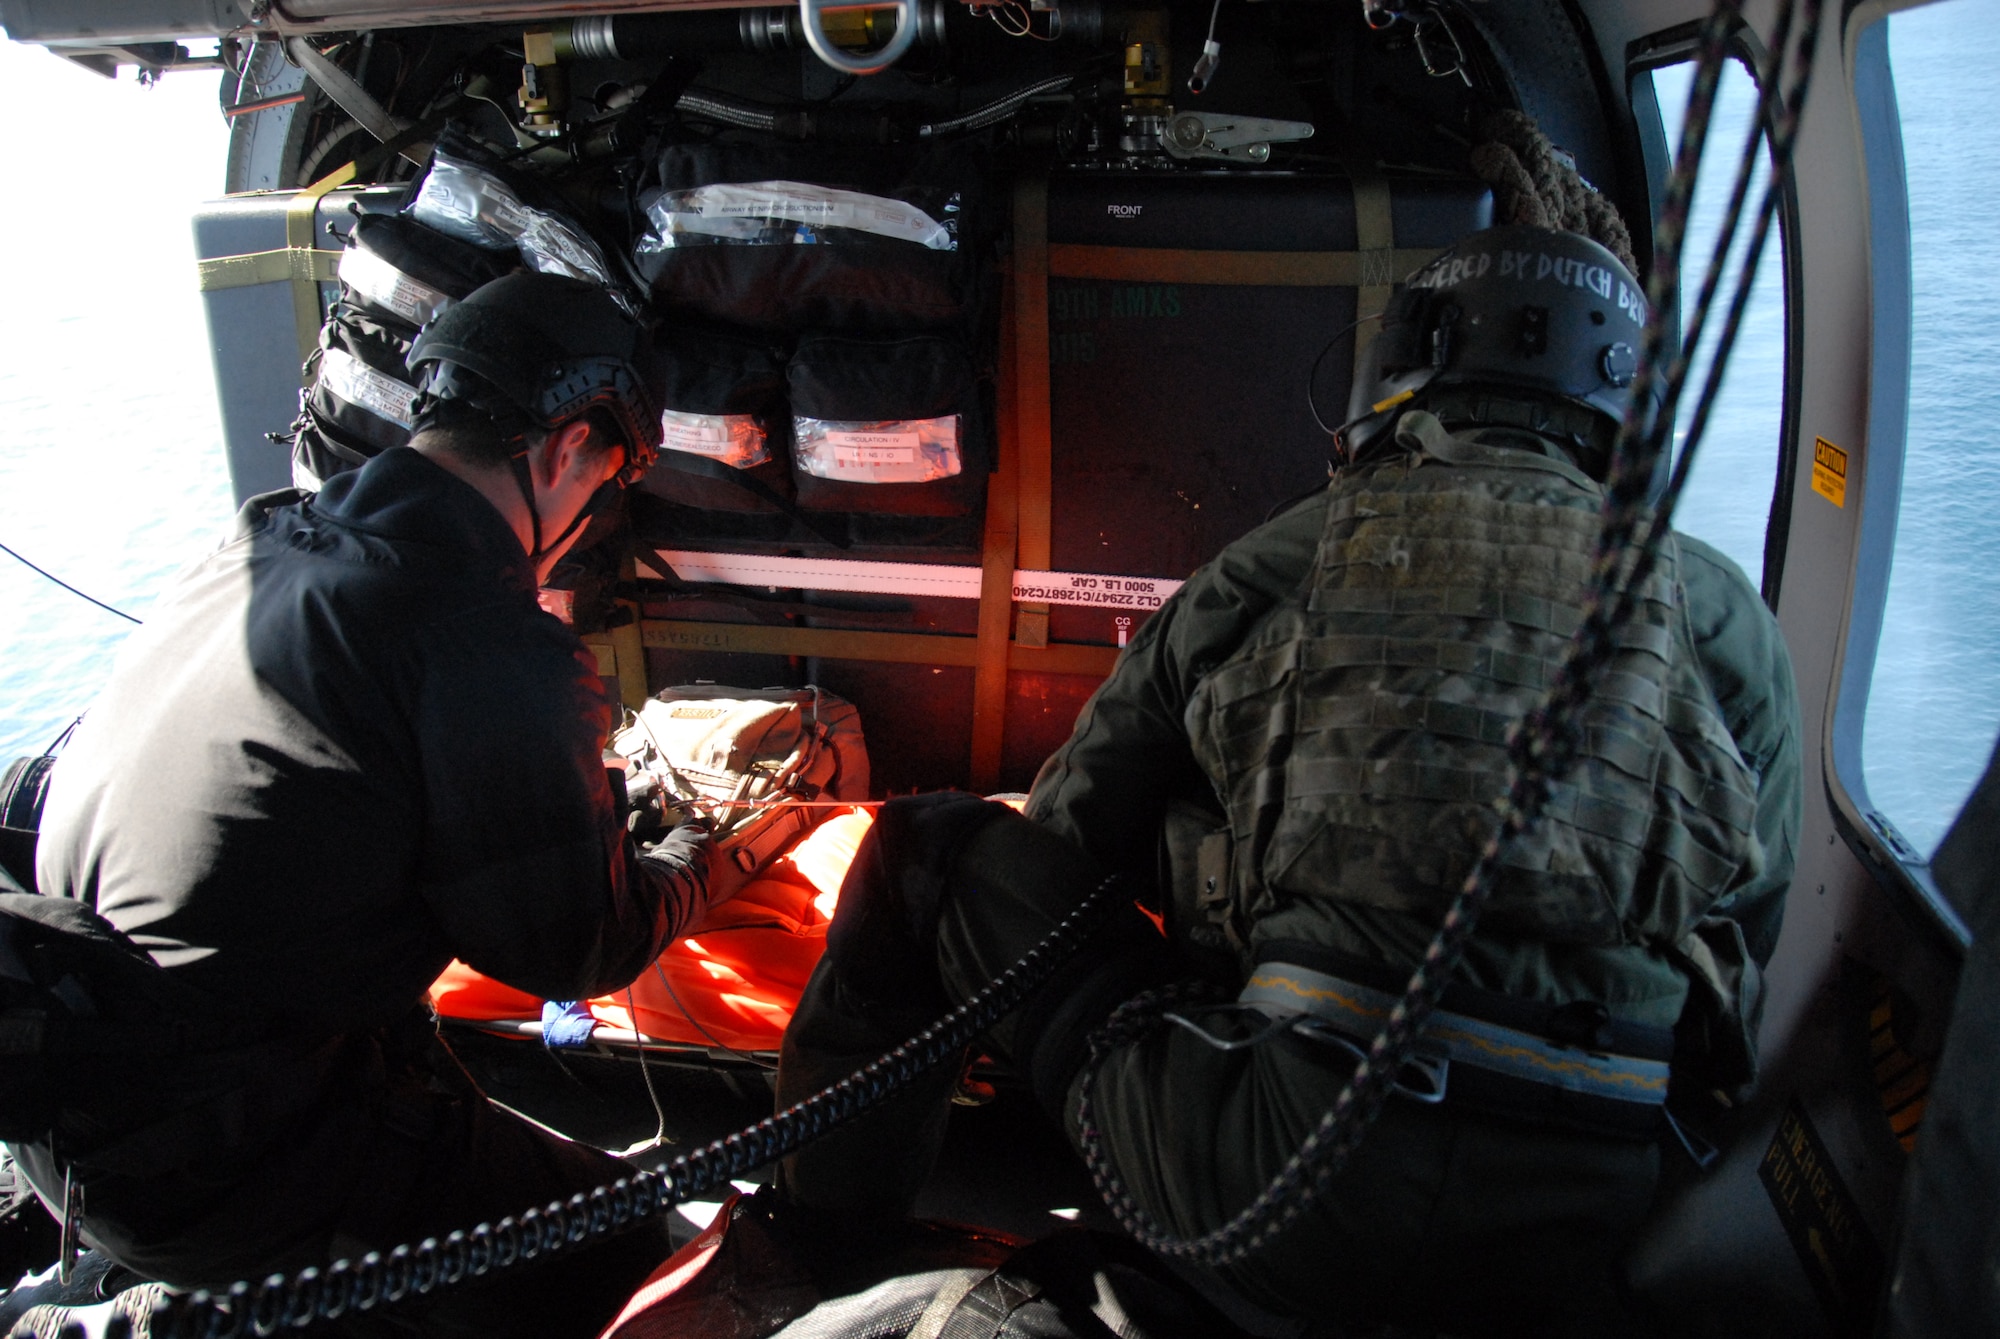 Tech. Sgt. Sean Pellaton, an aerial gunner assigned to the 129th Rescue Squadron, and Staff Sgt. Adam Vanhaaster, a pararescueman assigned to the 131st Rescue Squadron, load a patient into the HH-60G Pave Hawk rescue helicopter Feb. 4, 2012. Responding to the call from the Eleventh District Coast Guard at Alameda, pararescuers, or PJs, two Pave Hawks and one MC-130P Combat Shadow aircraft departed Moffett Federal Airfield. The team provided medical assistance to a 54-year-old male who had suffered stroke-like symptoms on the MSC Beijing, acargo ship more than 200 miles off the coast of California. Guardsmen medically evacuated the patient to the San Jose Regional Medical Center. (Air National Guard photo by Senior Airman Jessica Green)